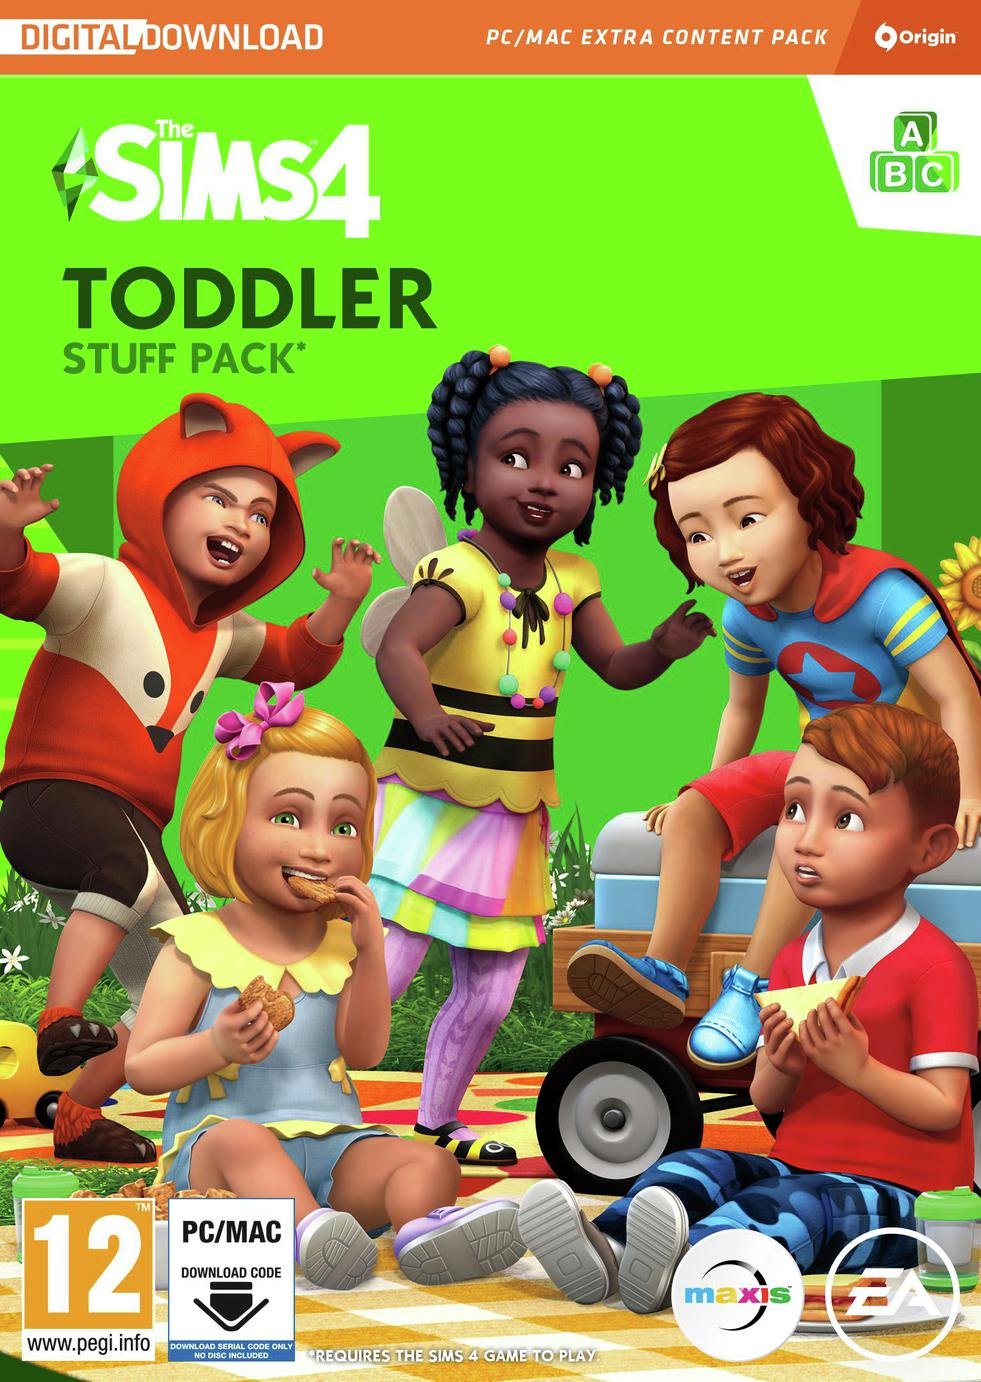 The Sims 4 Toddler Stuff Pack PC Game